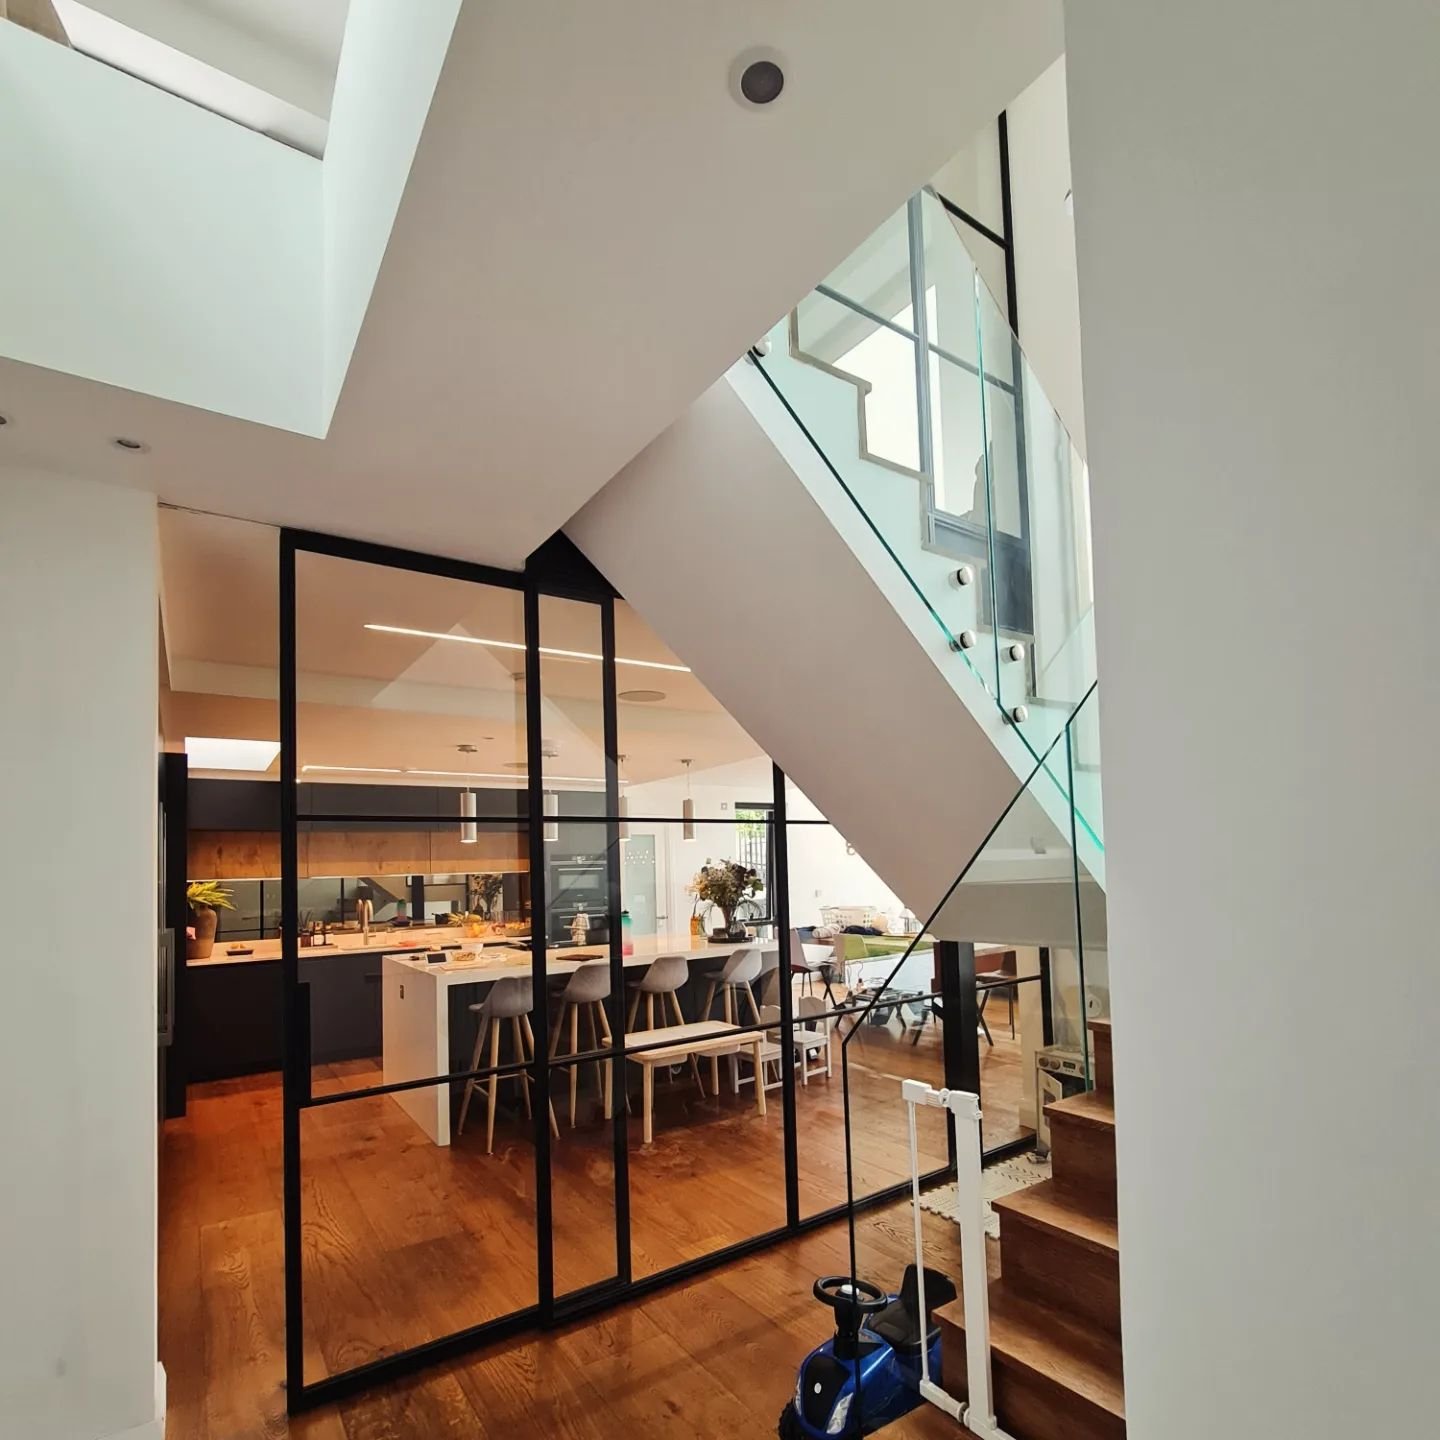 This incredibly unique project features a two-story steel-framed glass partition that stretches from the ground floor to the first floor ceiling, complete with a sleek flysh ceiling slider door that opens into the kitchen. Absolutely stunning!

#slid